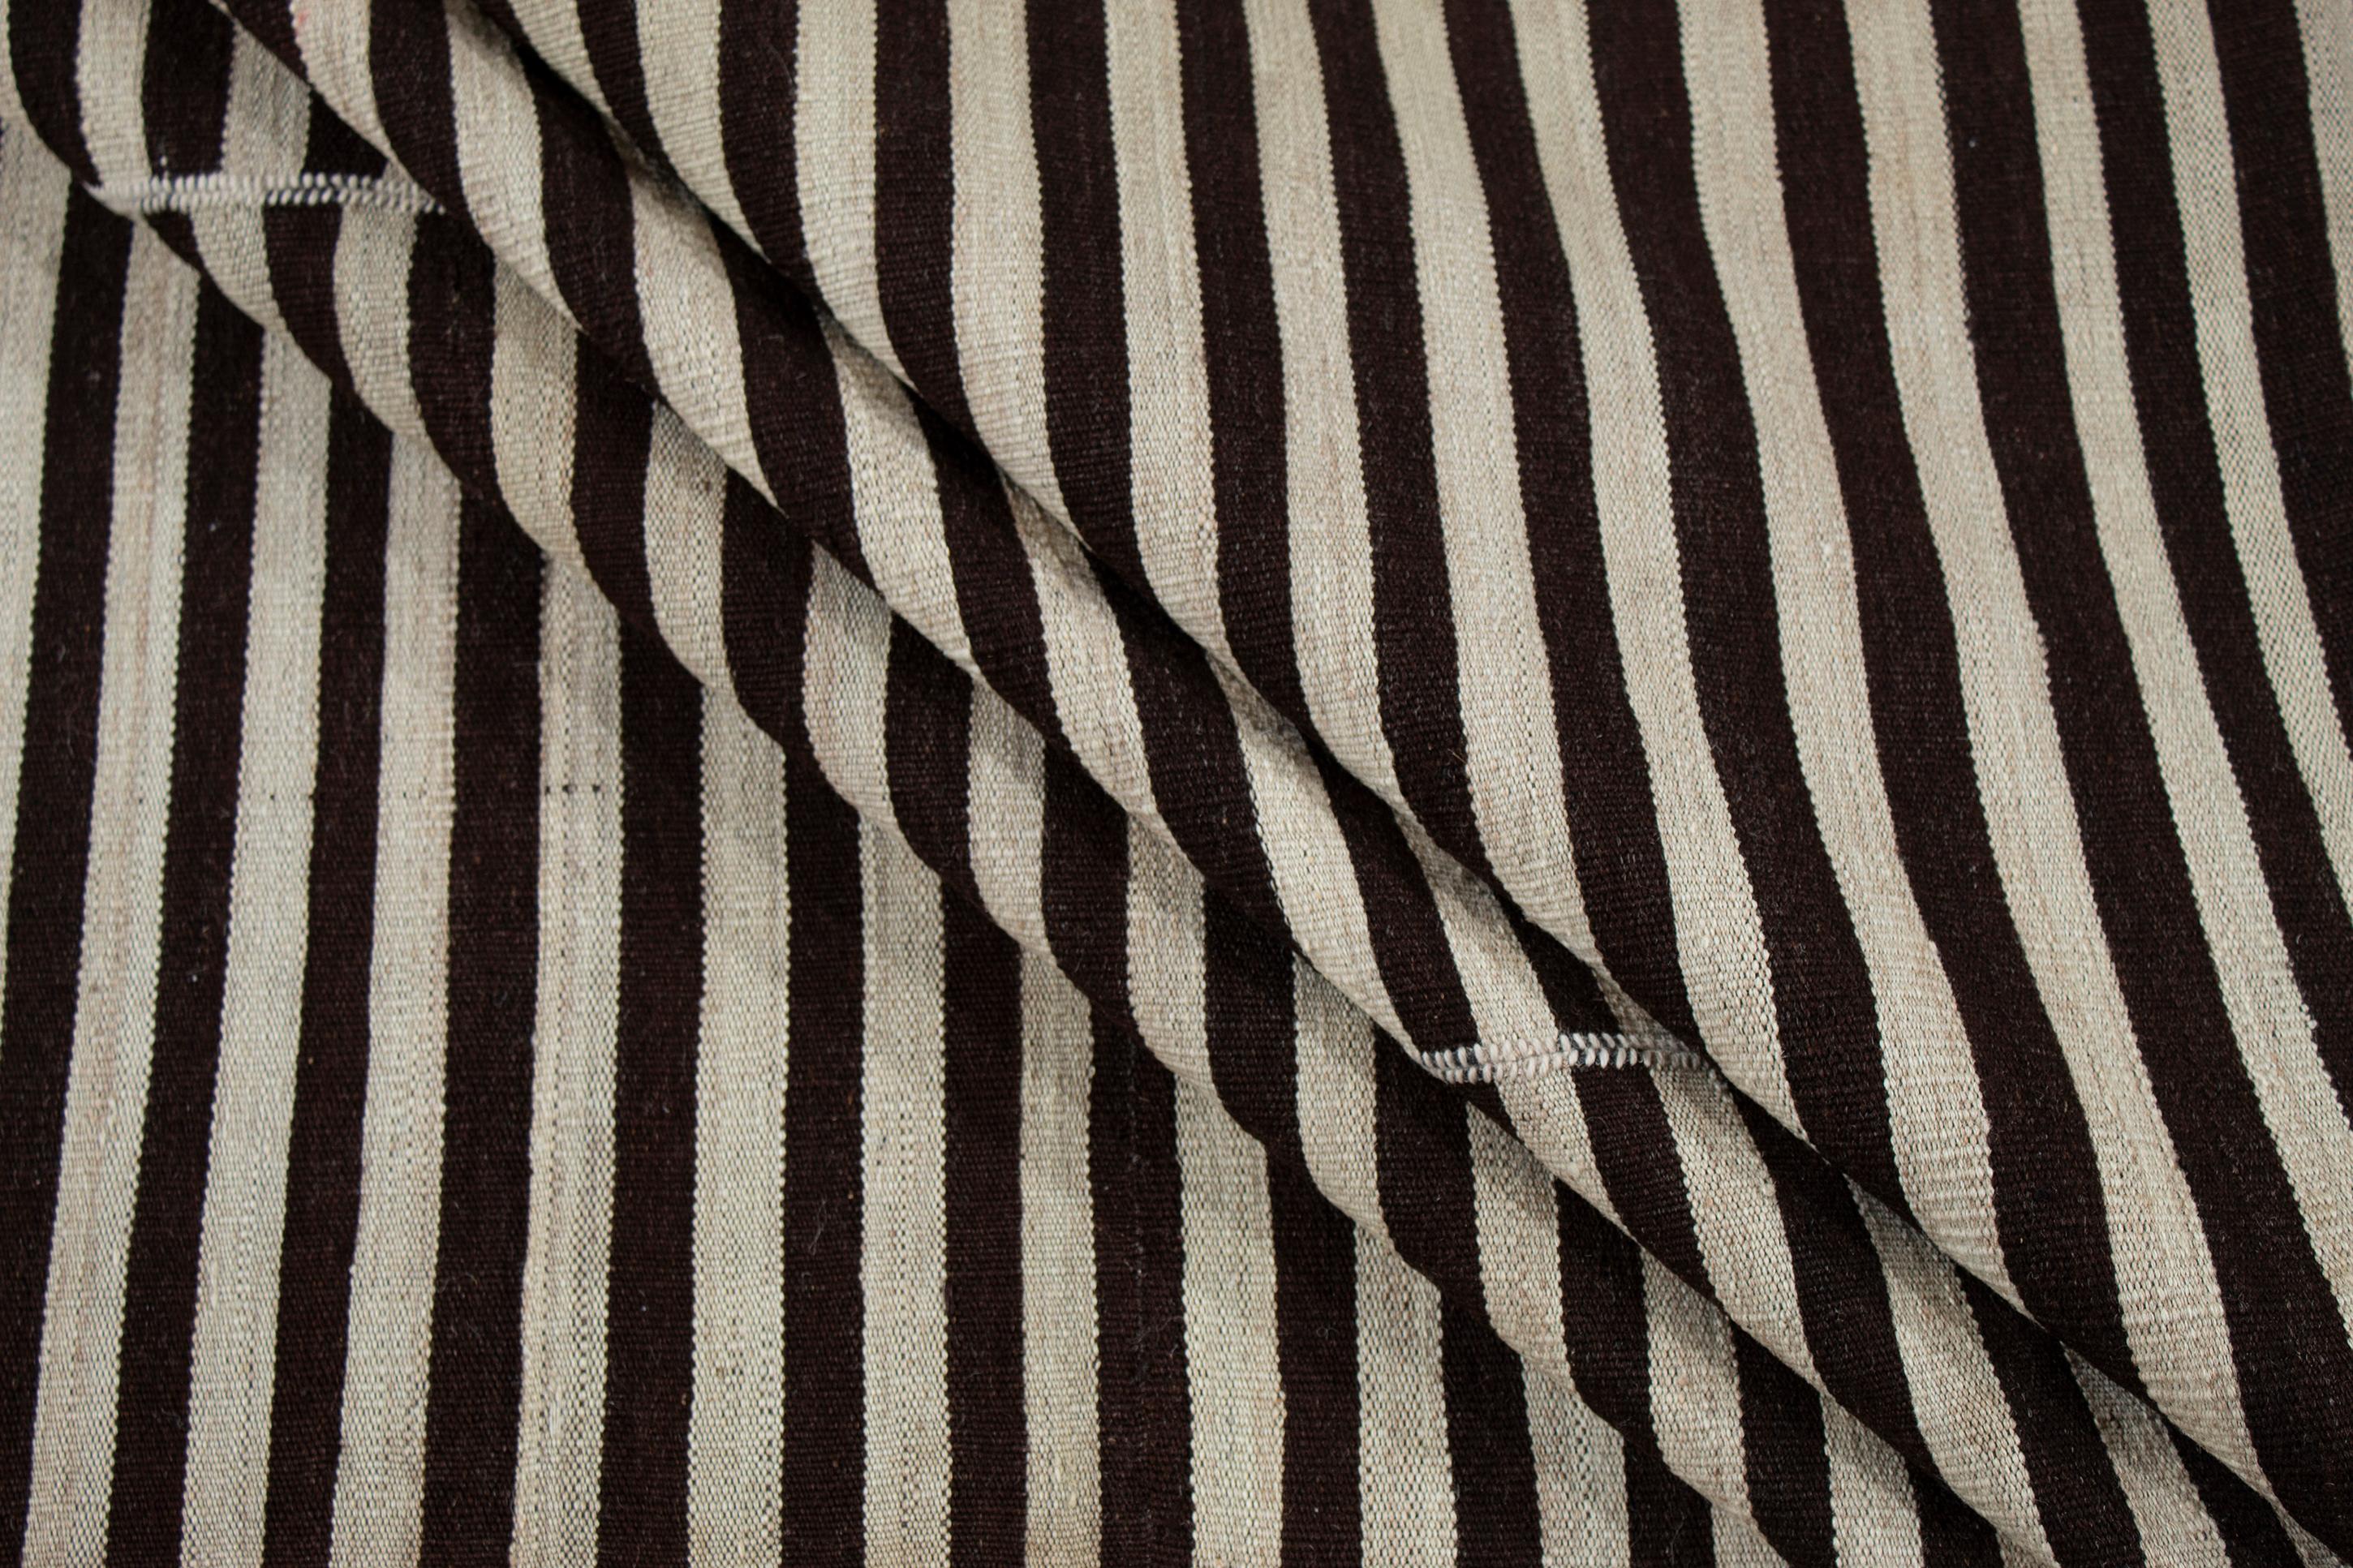 Vintage Persian Mazandaran Handwoven Flatweave Rug in Black and White Stripe In Good Condition For Sale In New York, NY